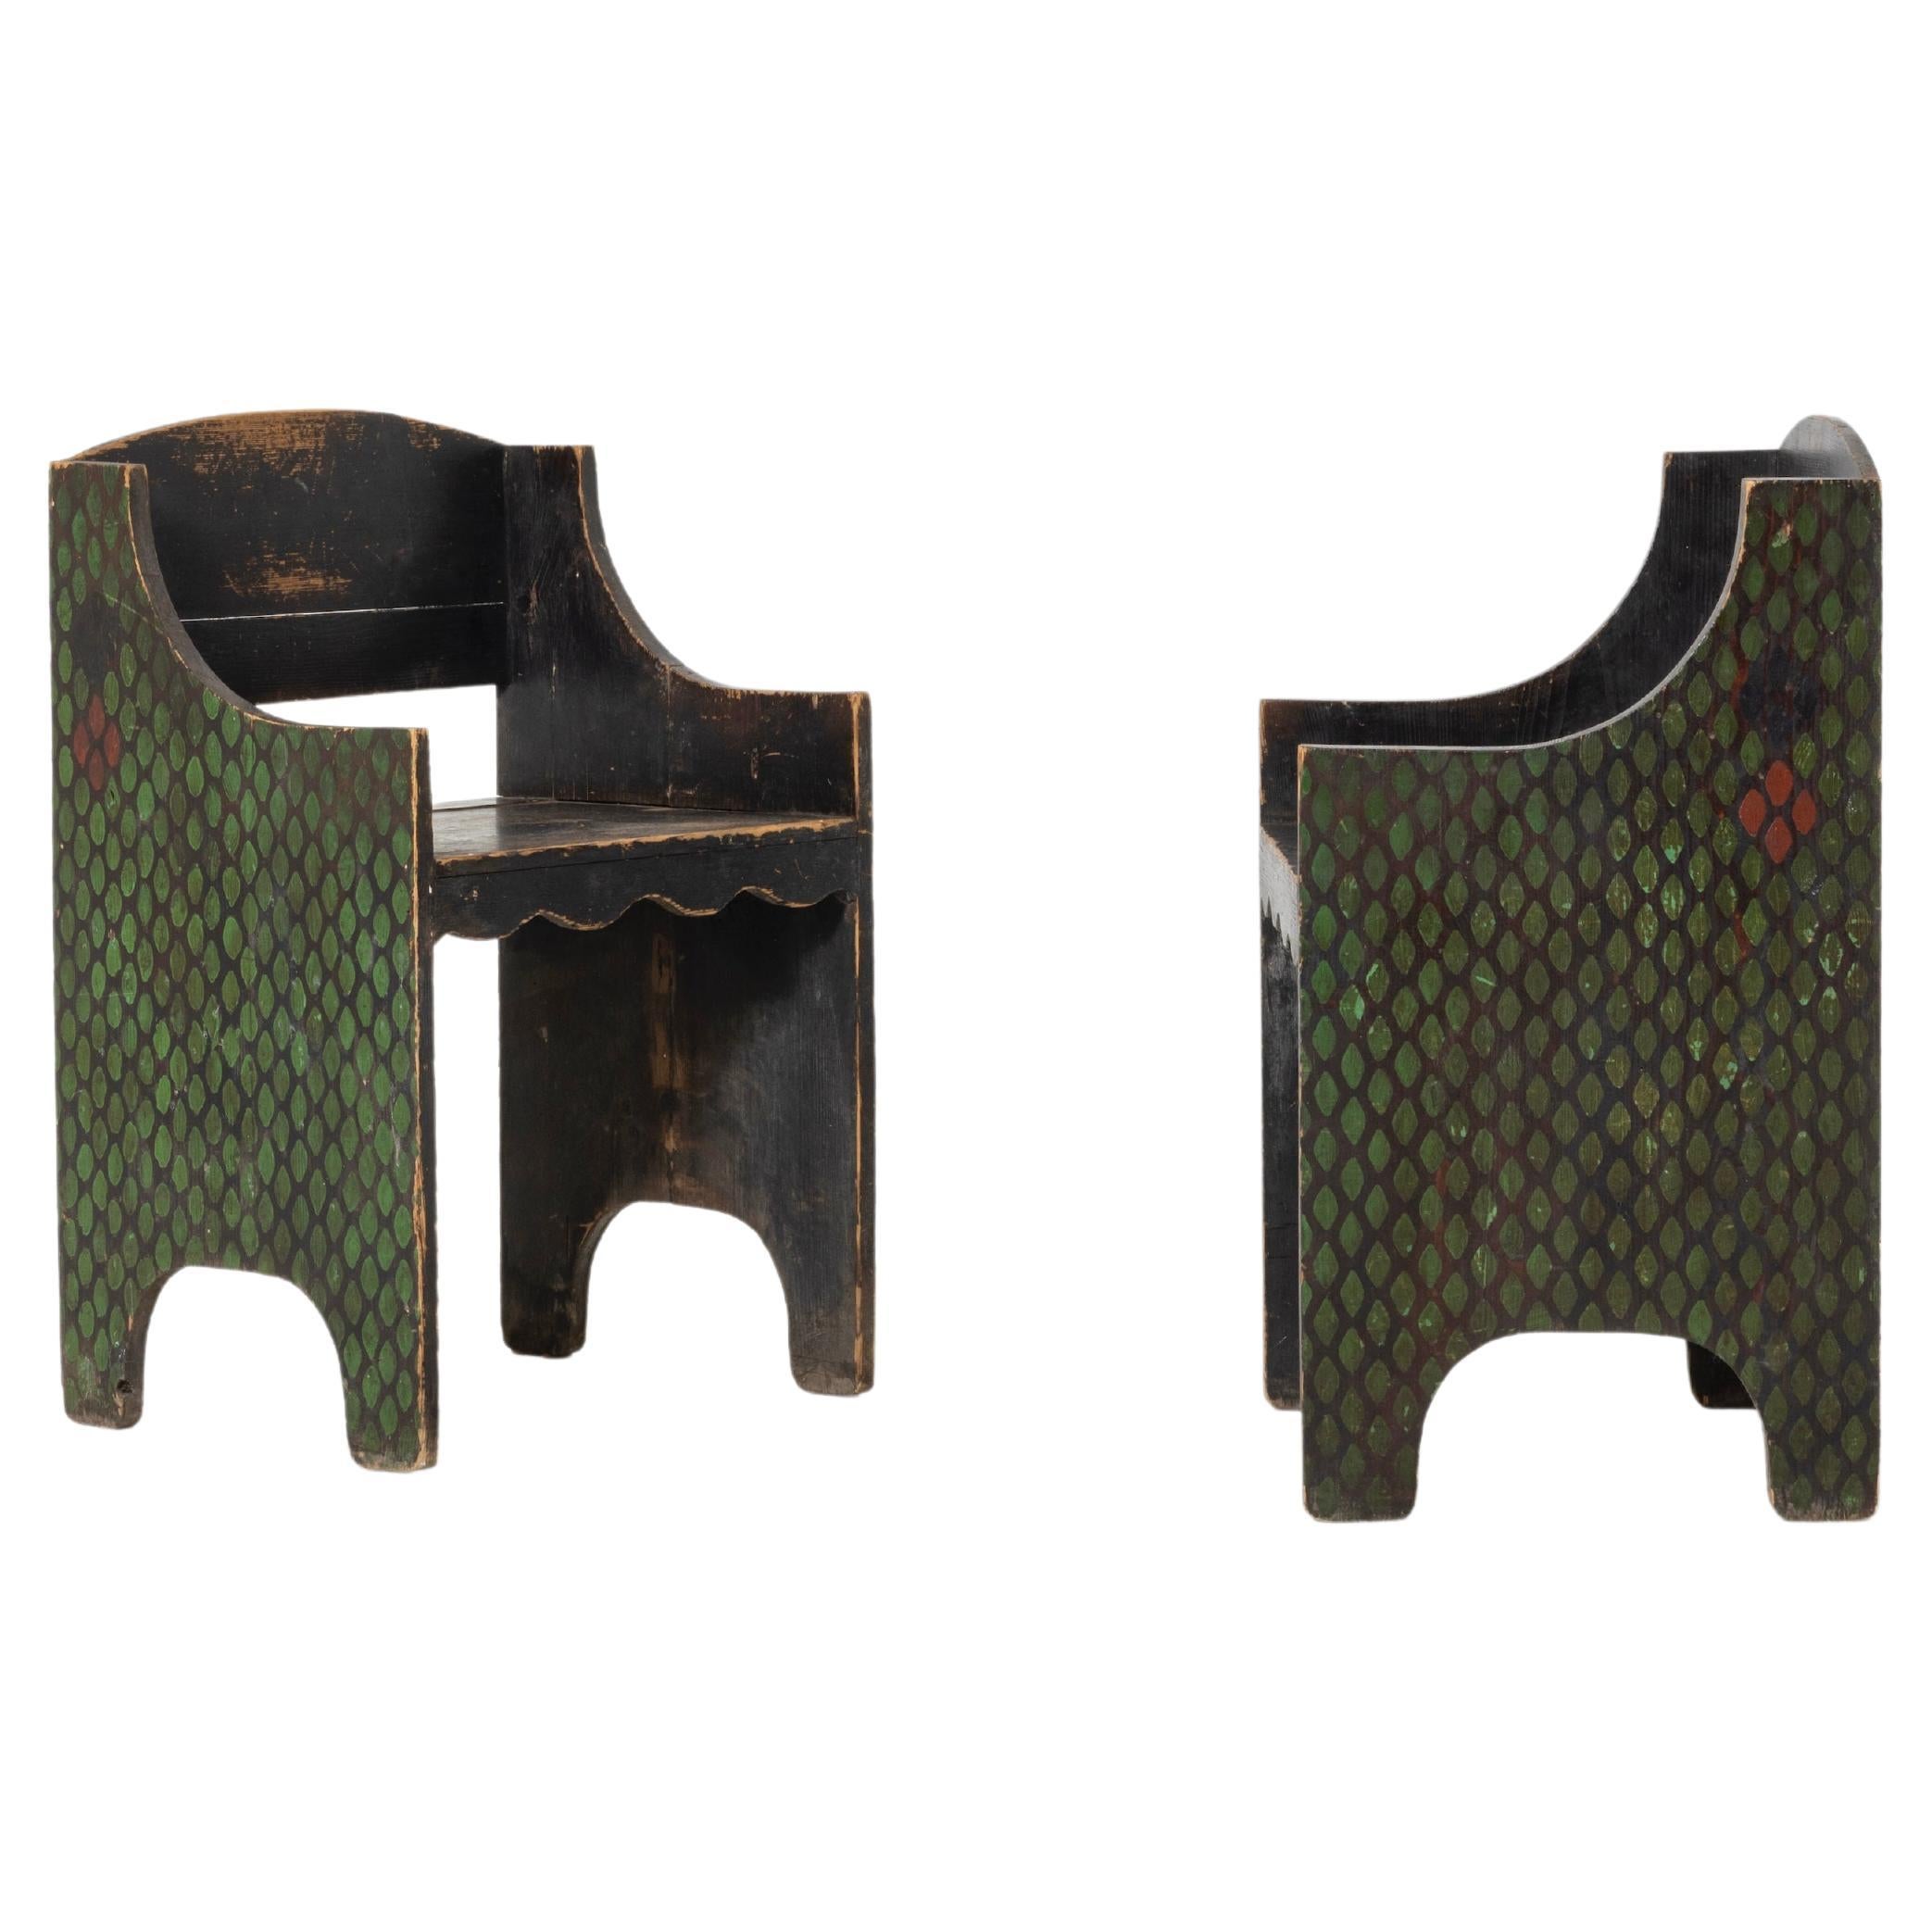 Vittorio Zecchin Pair of Armchairs from Early 1920s, Italy For Sale